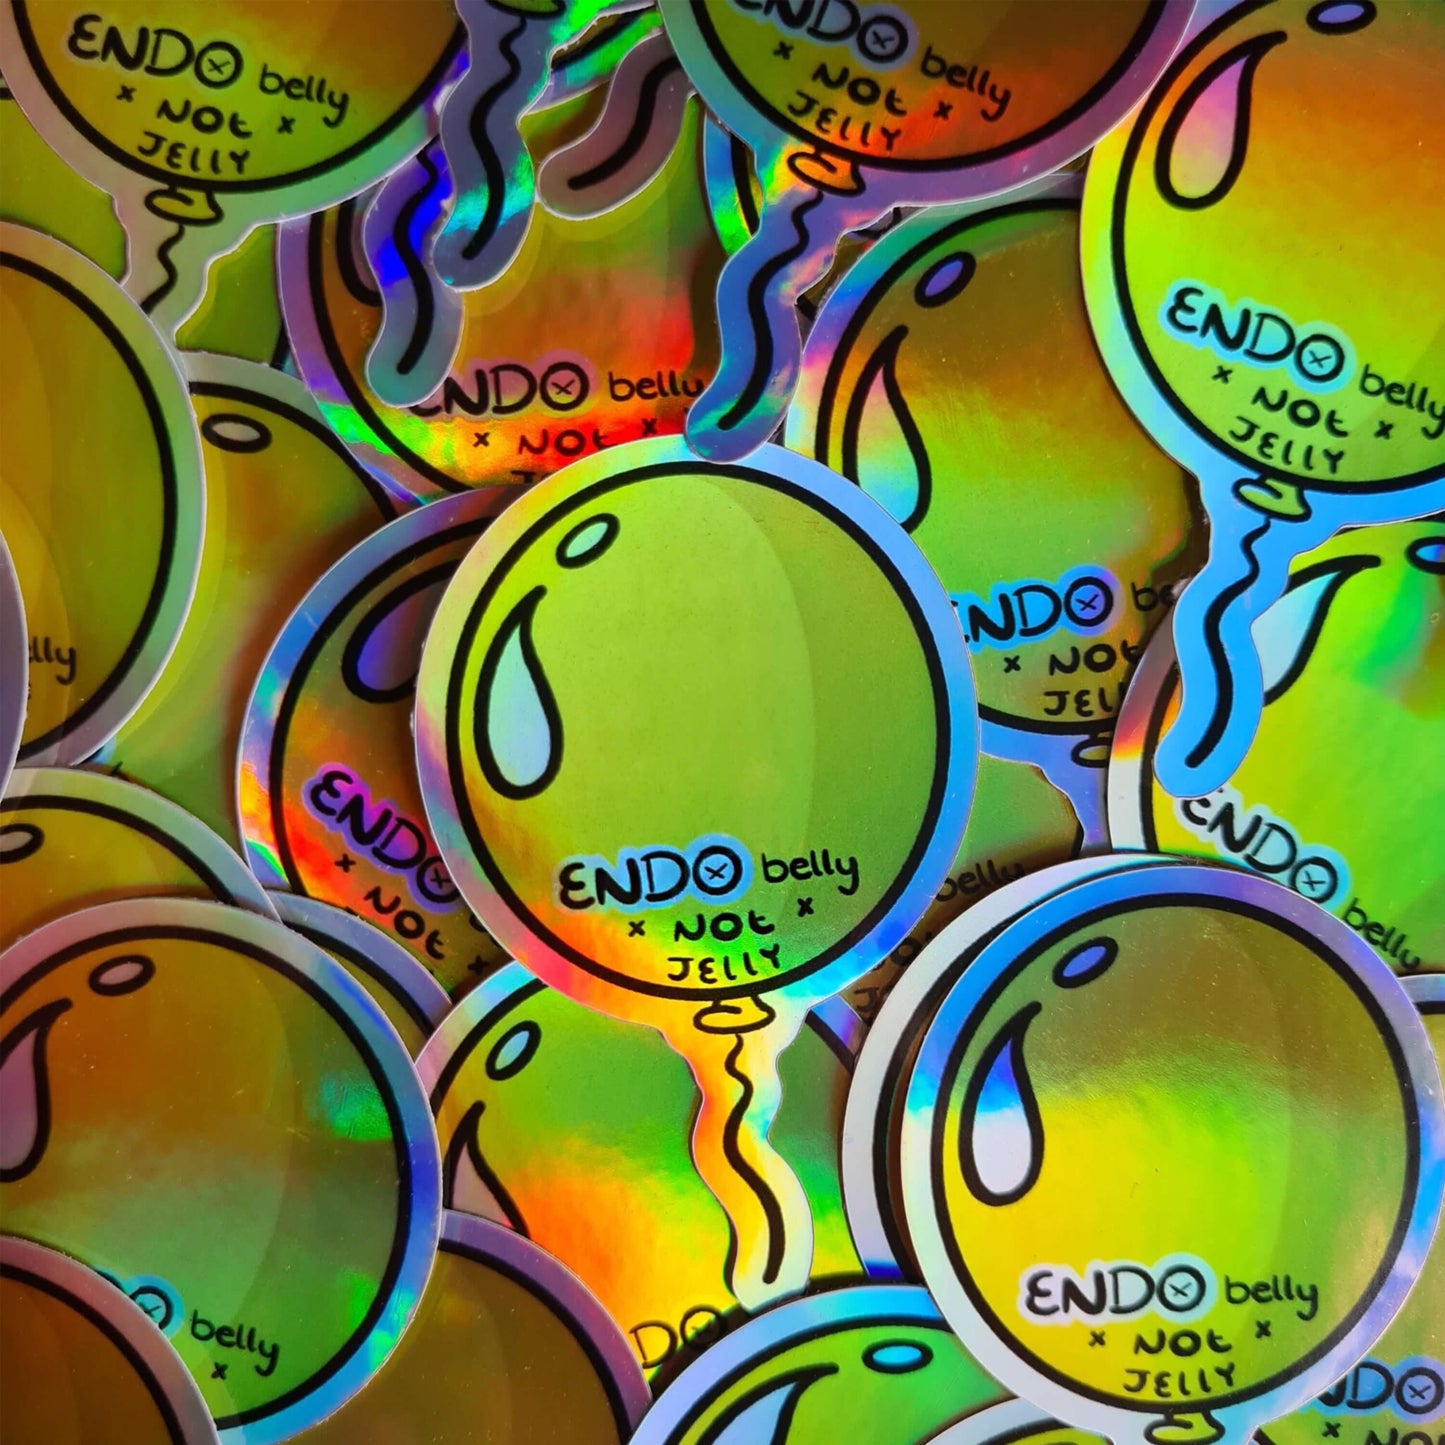 The Endo Belly Sticker on a pile of multiple copies of the sticker. The yellow balloon shape sticker has bottom black text reading 'ENDO belly not jelly'. The hand drawn design is raising awareness for endometriosis.